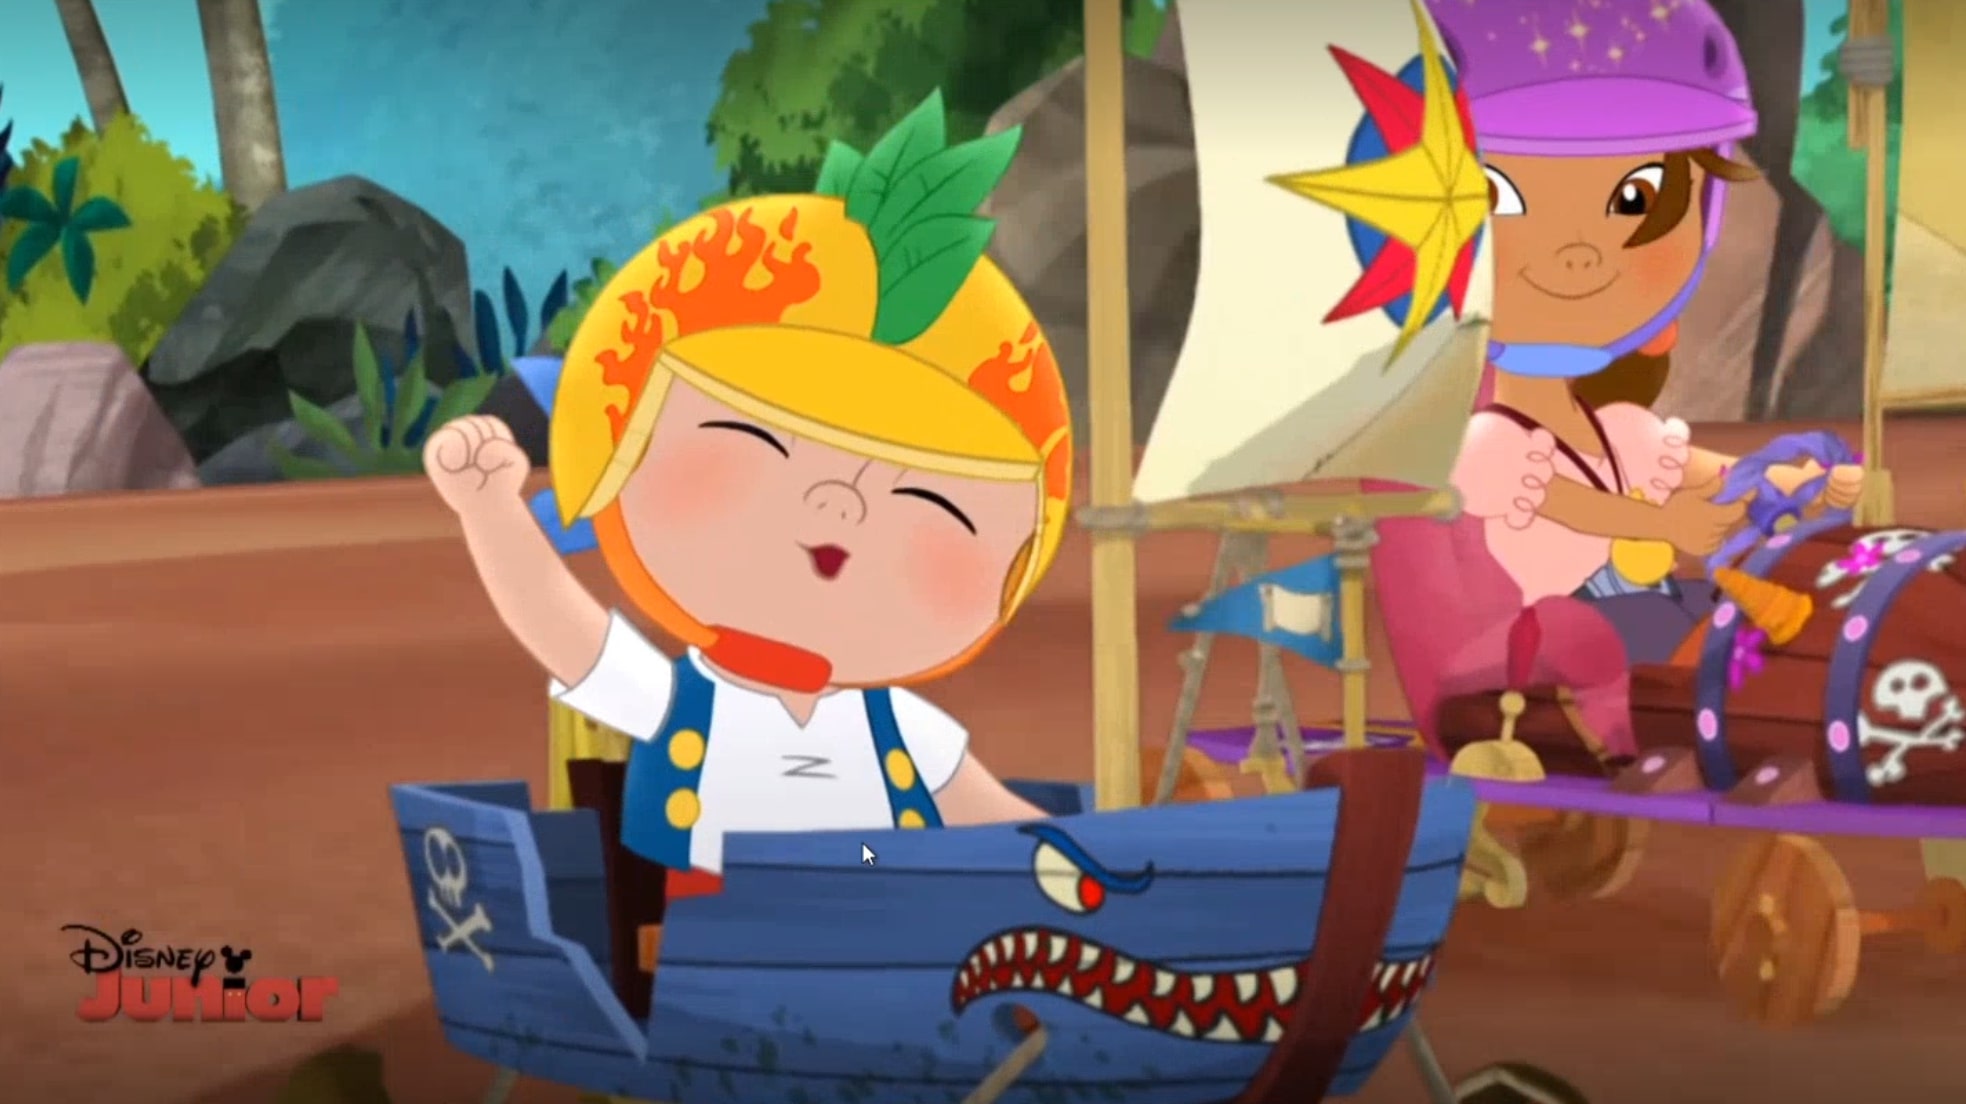 A cartoon image of a young boy wearing a helmet and sitting in a blue pirate ship